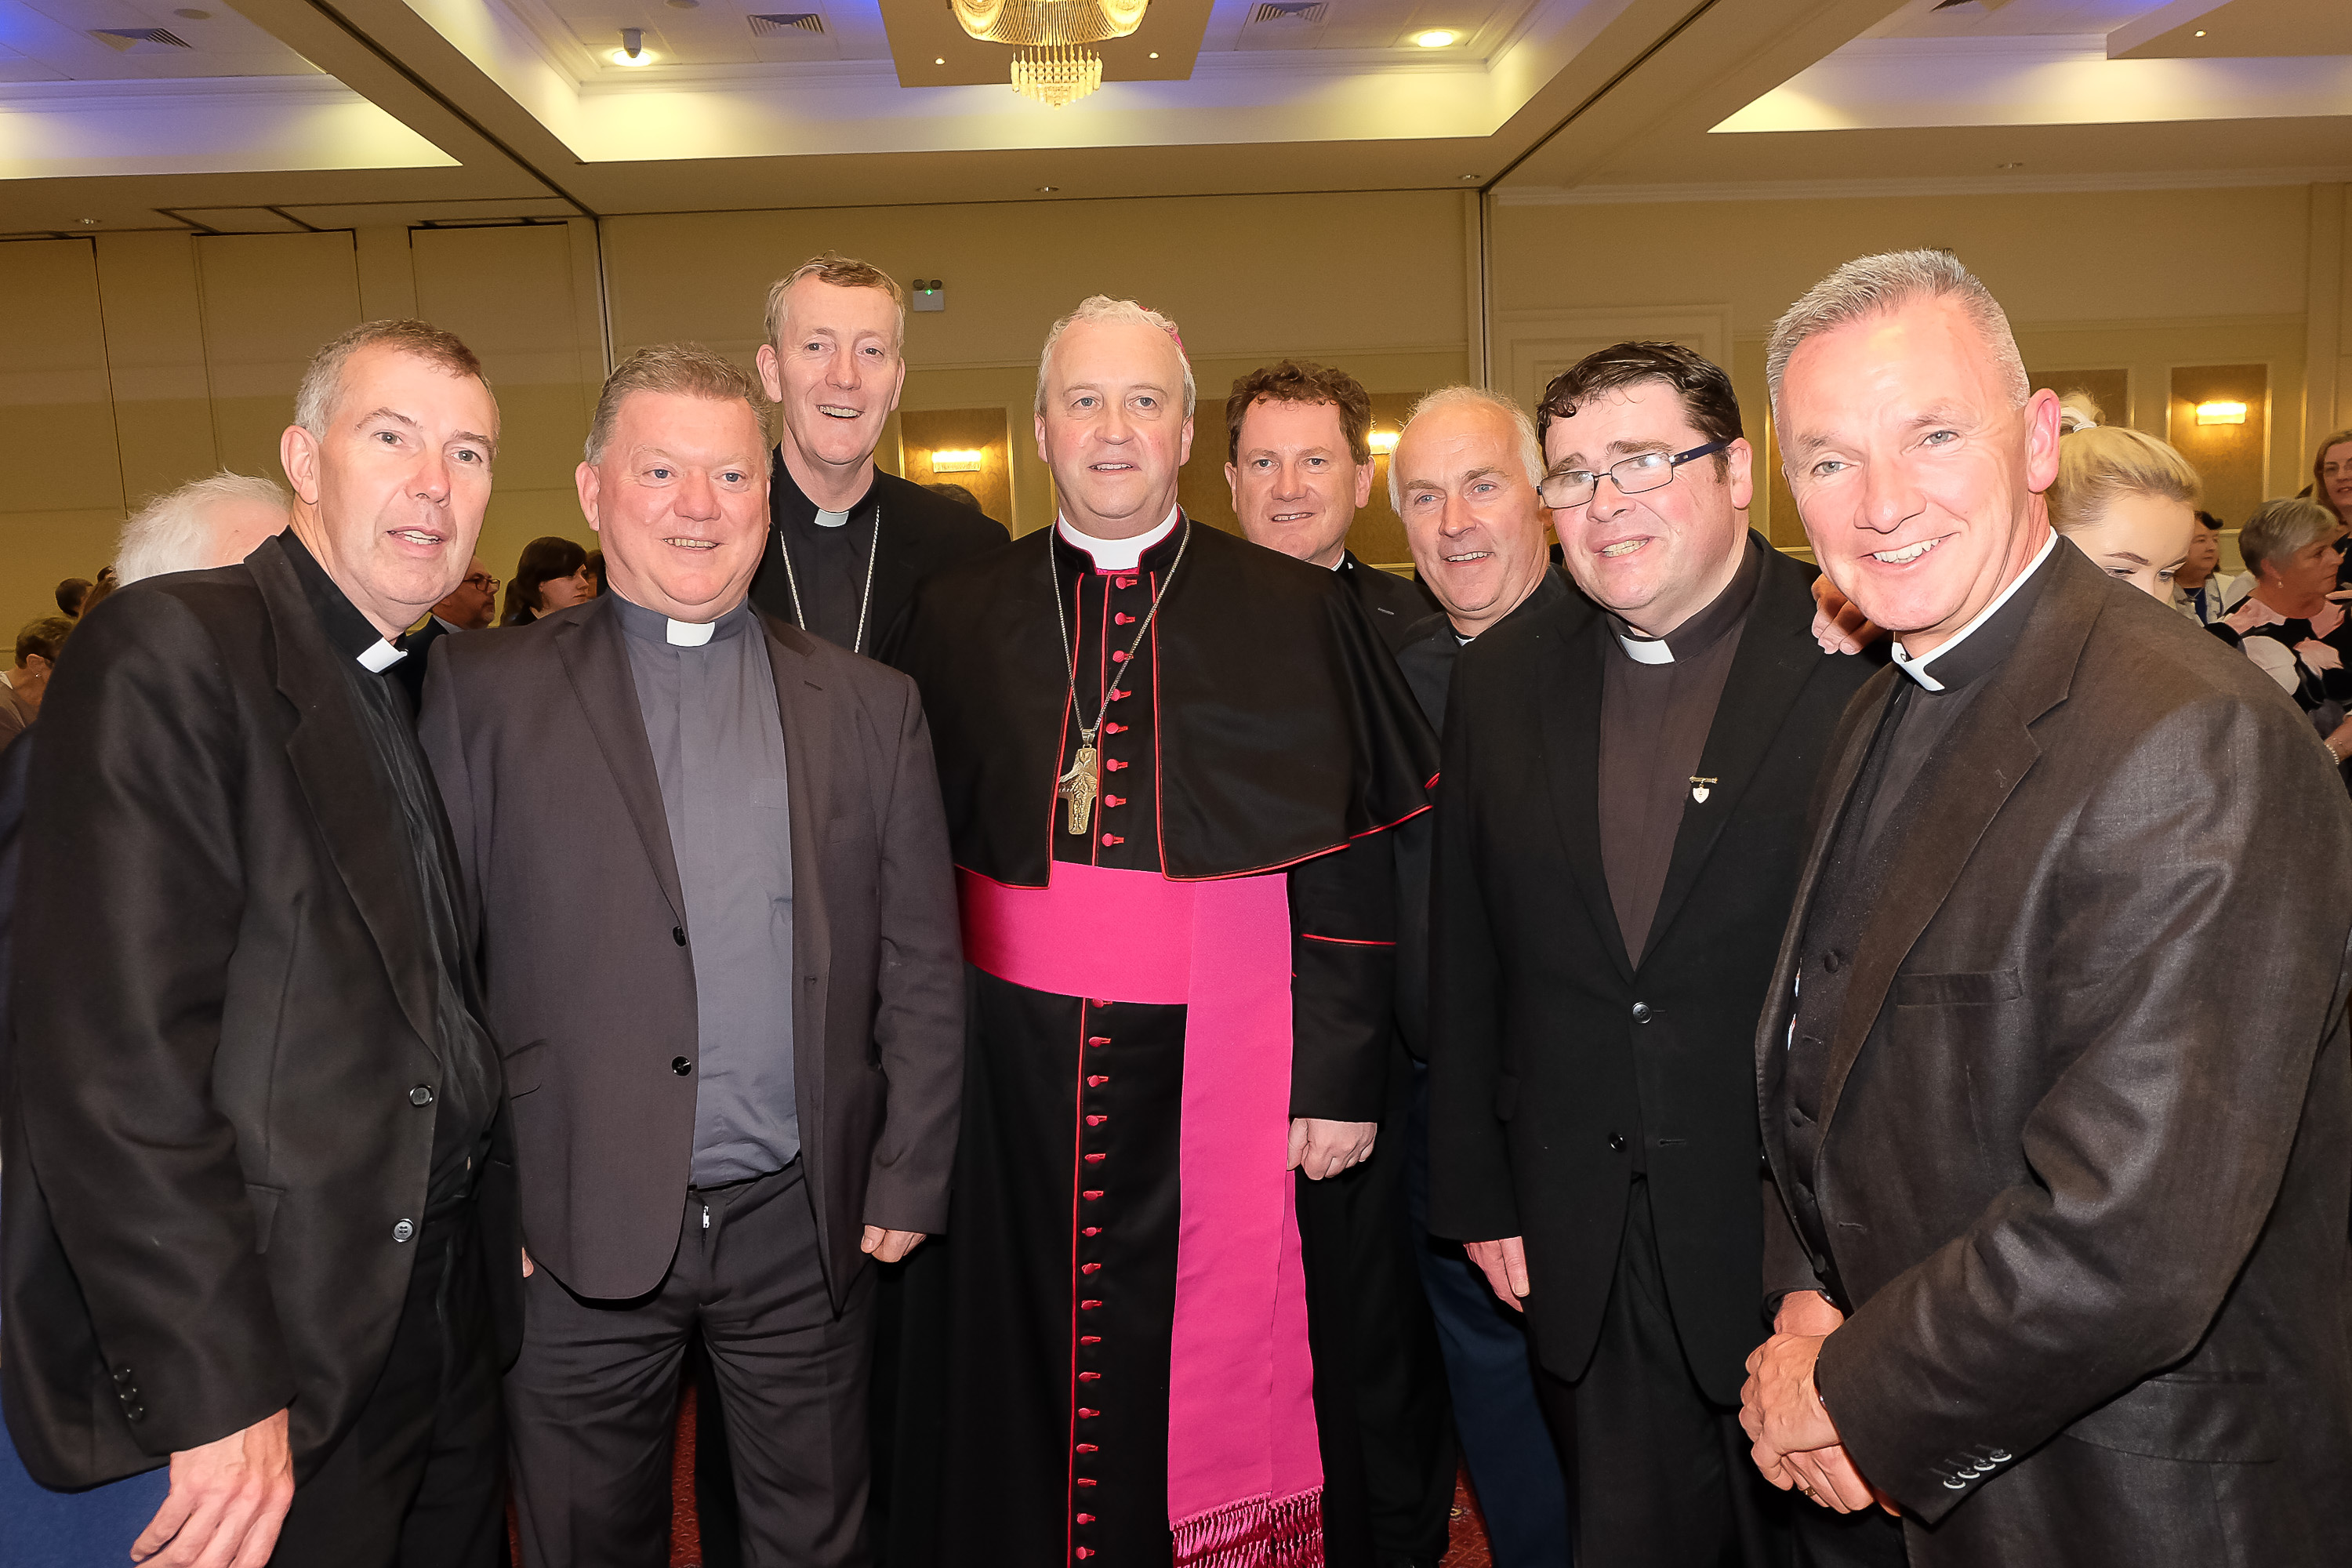 Bishop Michael Router with his classmates at a celebration dinner following the Bishop's OrdinationFrom left: Fr Joe Gallagher, Fr Philip Gaffney, Bishop Denis Nulty, Bishop Michael Router, Canon Eugene Sweeney, Fr Maurice McMorrough, Fr John Loftus and Fr John Kenny Armagh City Hotel, Armagh,  21 July 2019Credit: LiamMcArdle.com